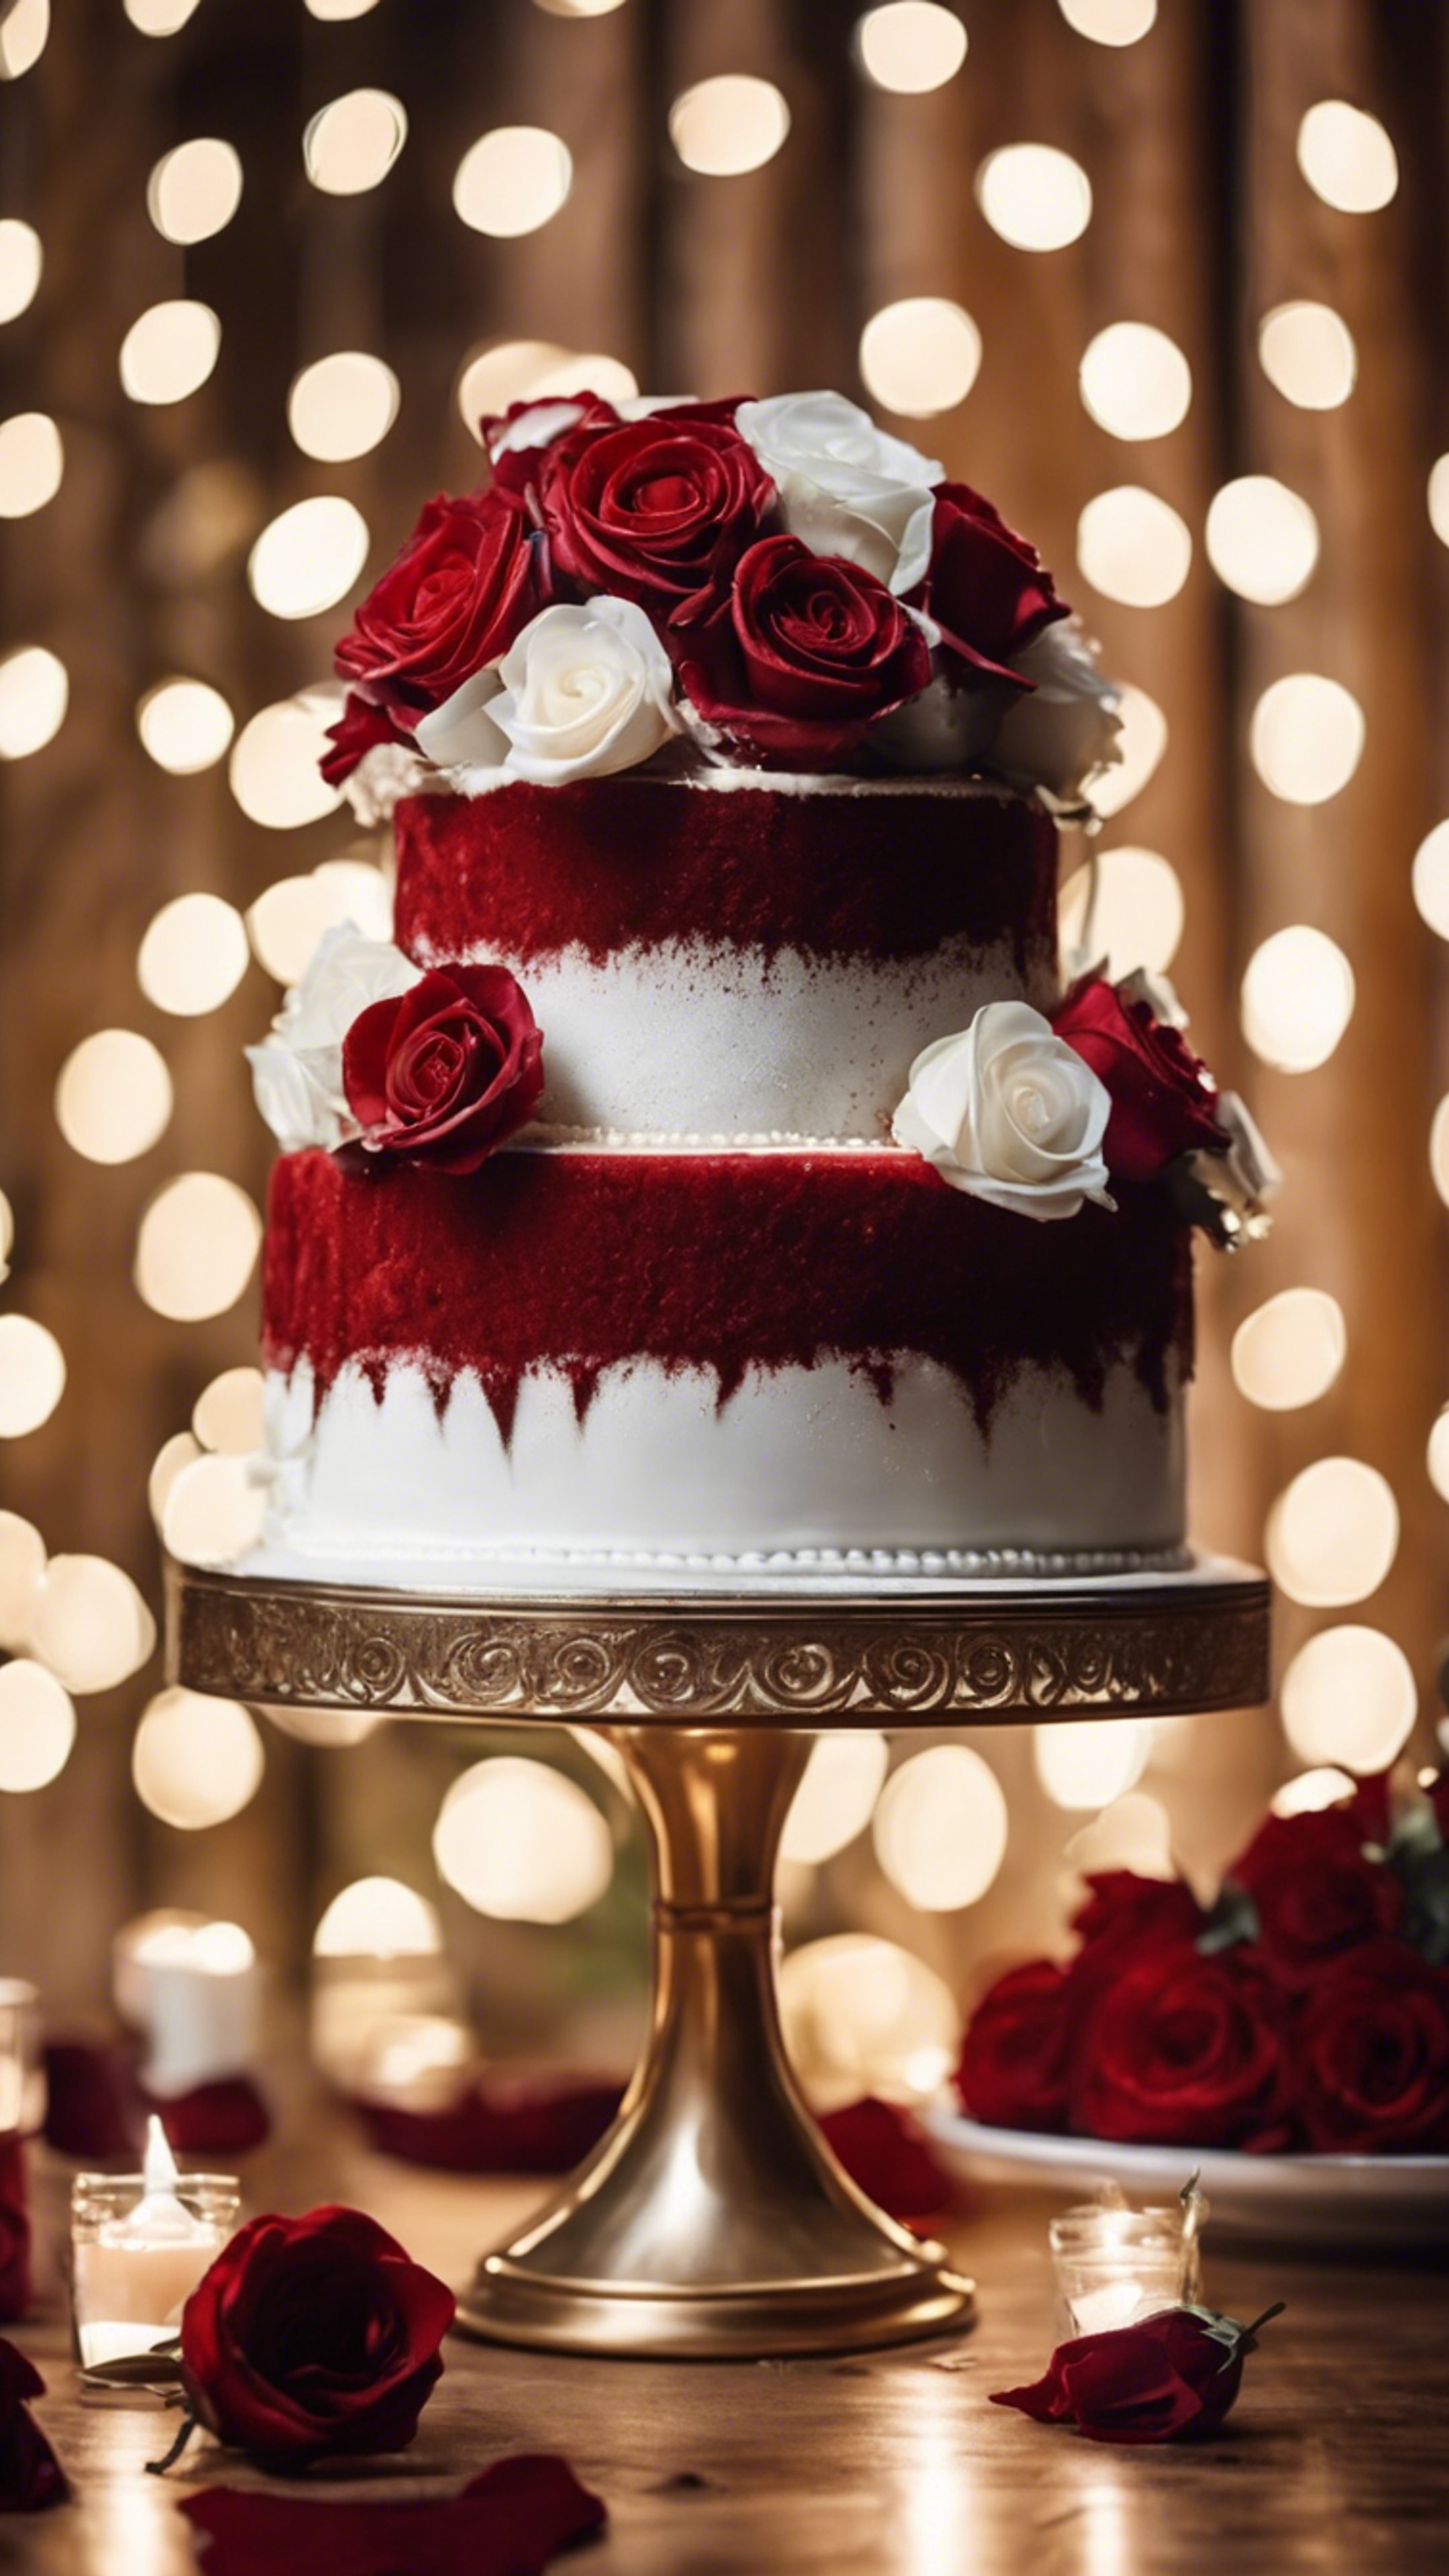 Three-tiered red velvet wedding cake adorned with white roses, against a backdrop of twinkling fairy lights. Wallpaper[b48557e9e8f84a90b888]